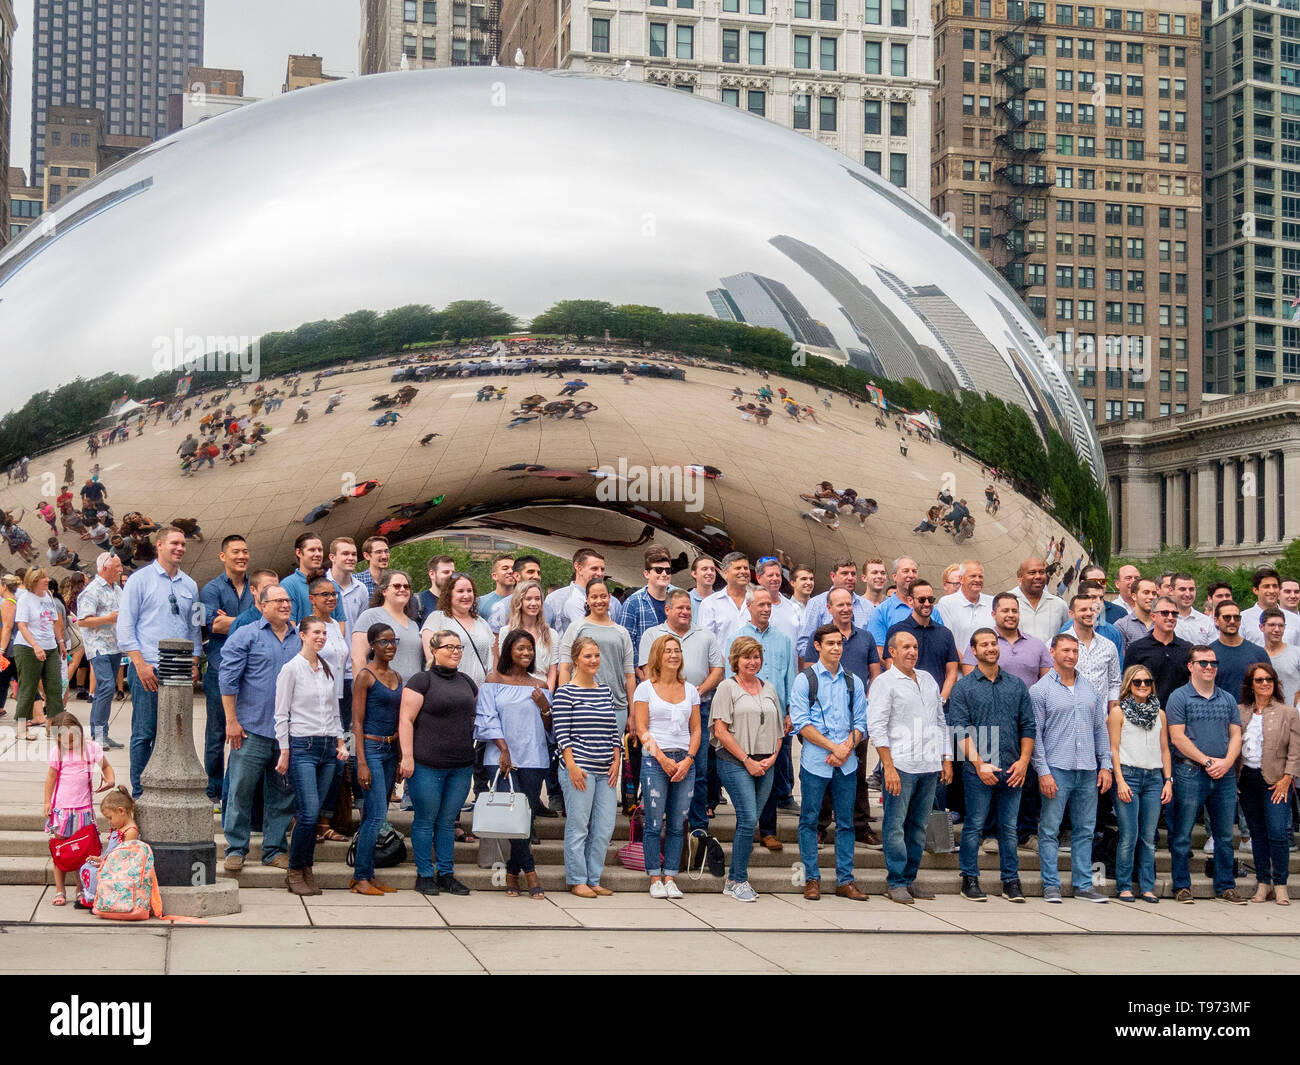 Tourists pose for a group photo at Cloud Gate in Millenium Park, Chicago. Cloud Gate is a public sculpture by Indian-born British artist Sir Anish Kapoor, that is the centerpiece of AT&T Plaza at Millennium Park in the Loop community area. Stock Photo